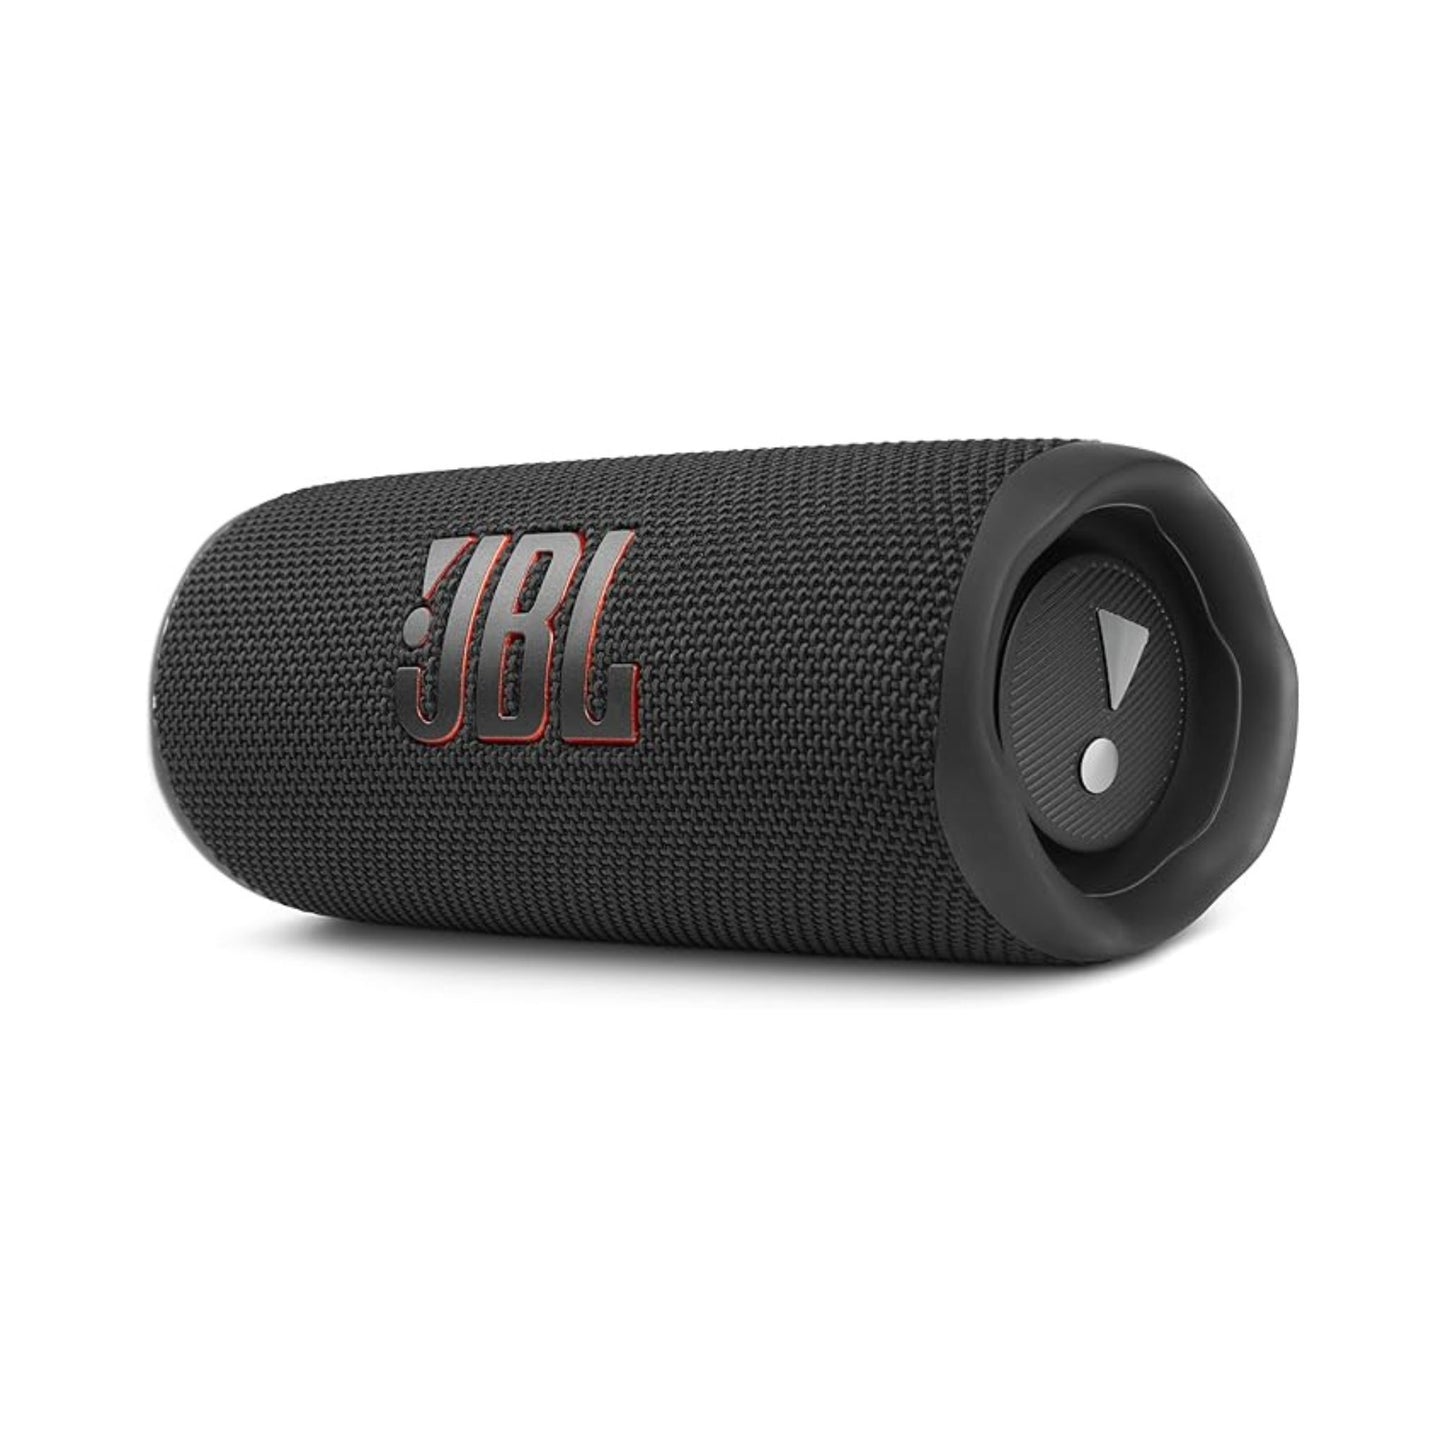 JBL Flip 6 Portable IP67 Waterproof Speaker with Bold Original Pro Sound, 2-Way Speaker, Powerful Sound and Deep Bass, 12 Hours Battery, Safe USB-C Charging Protection - Black